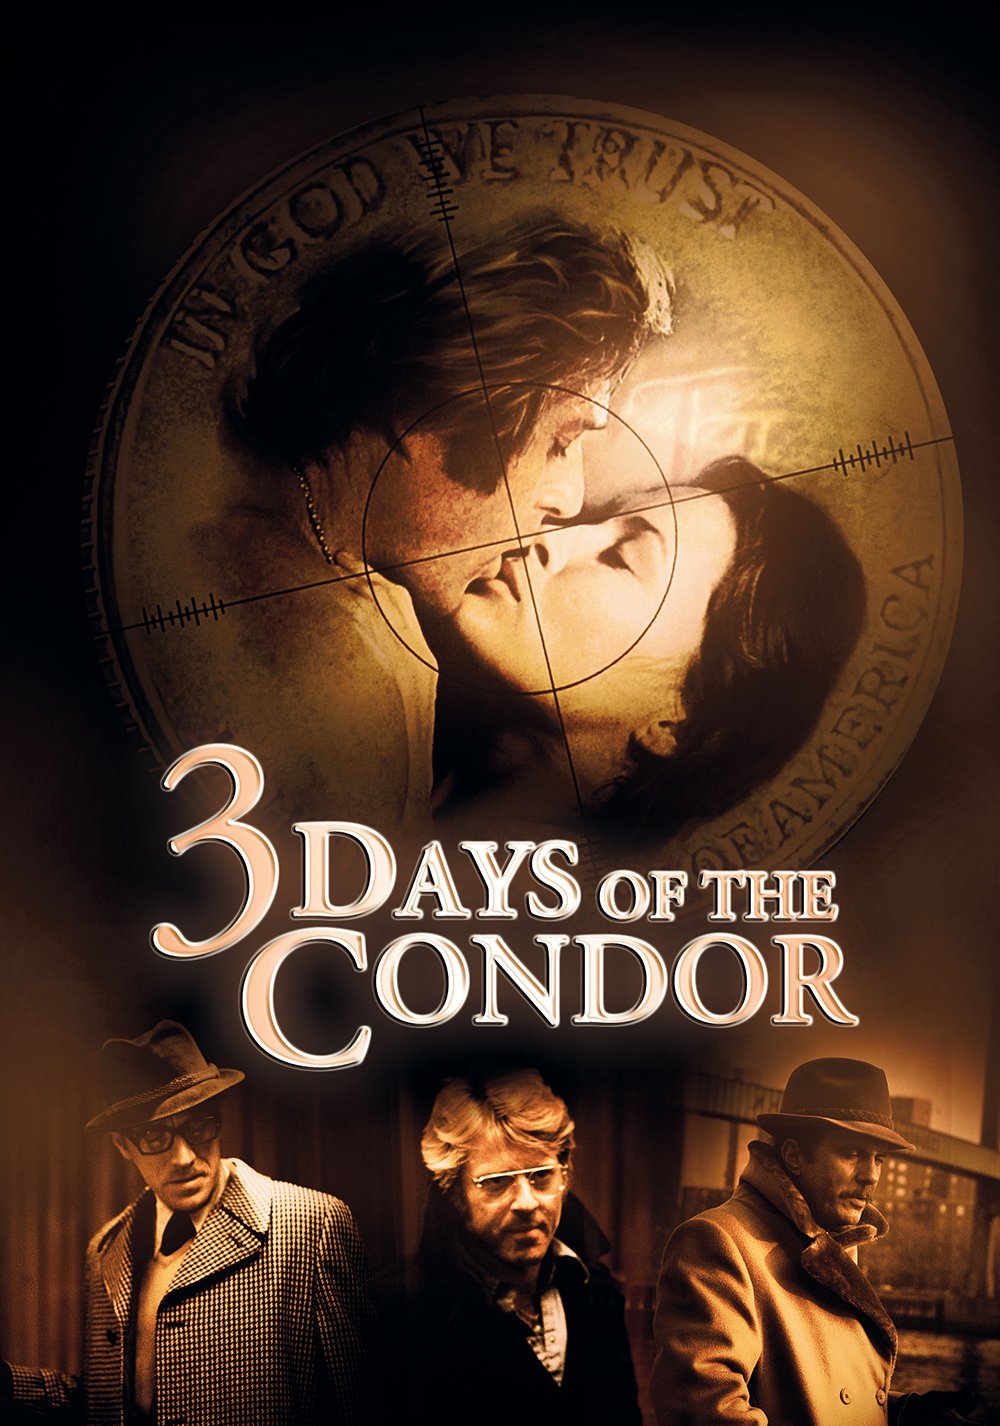 3 days of the condor